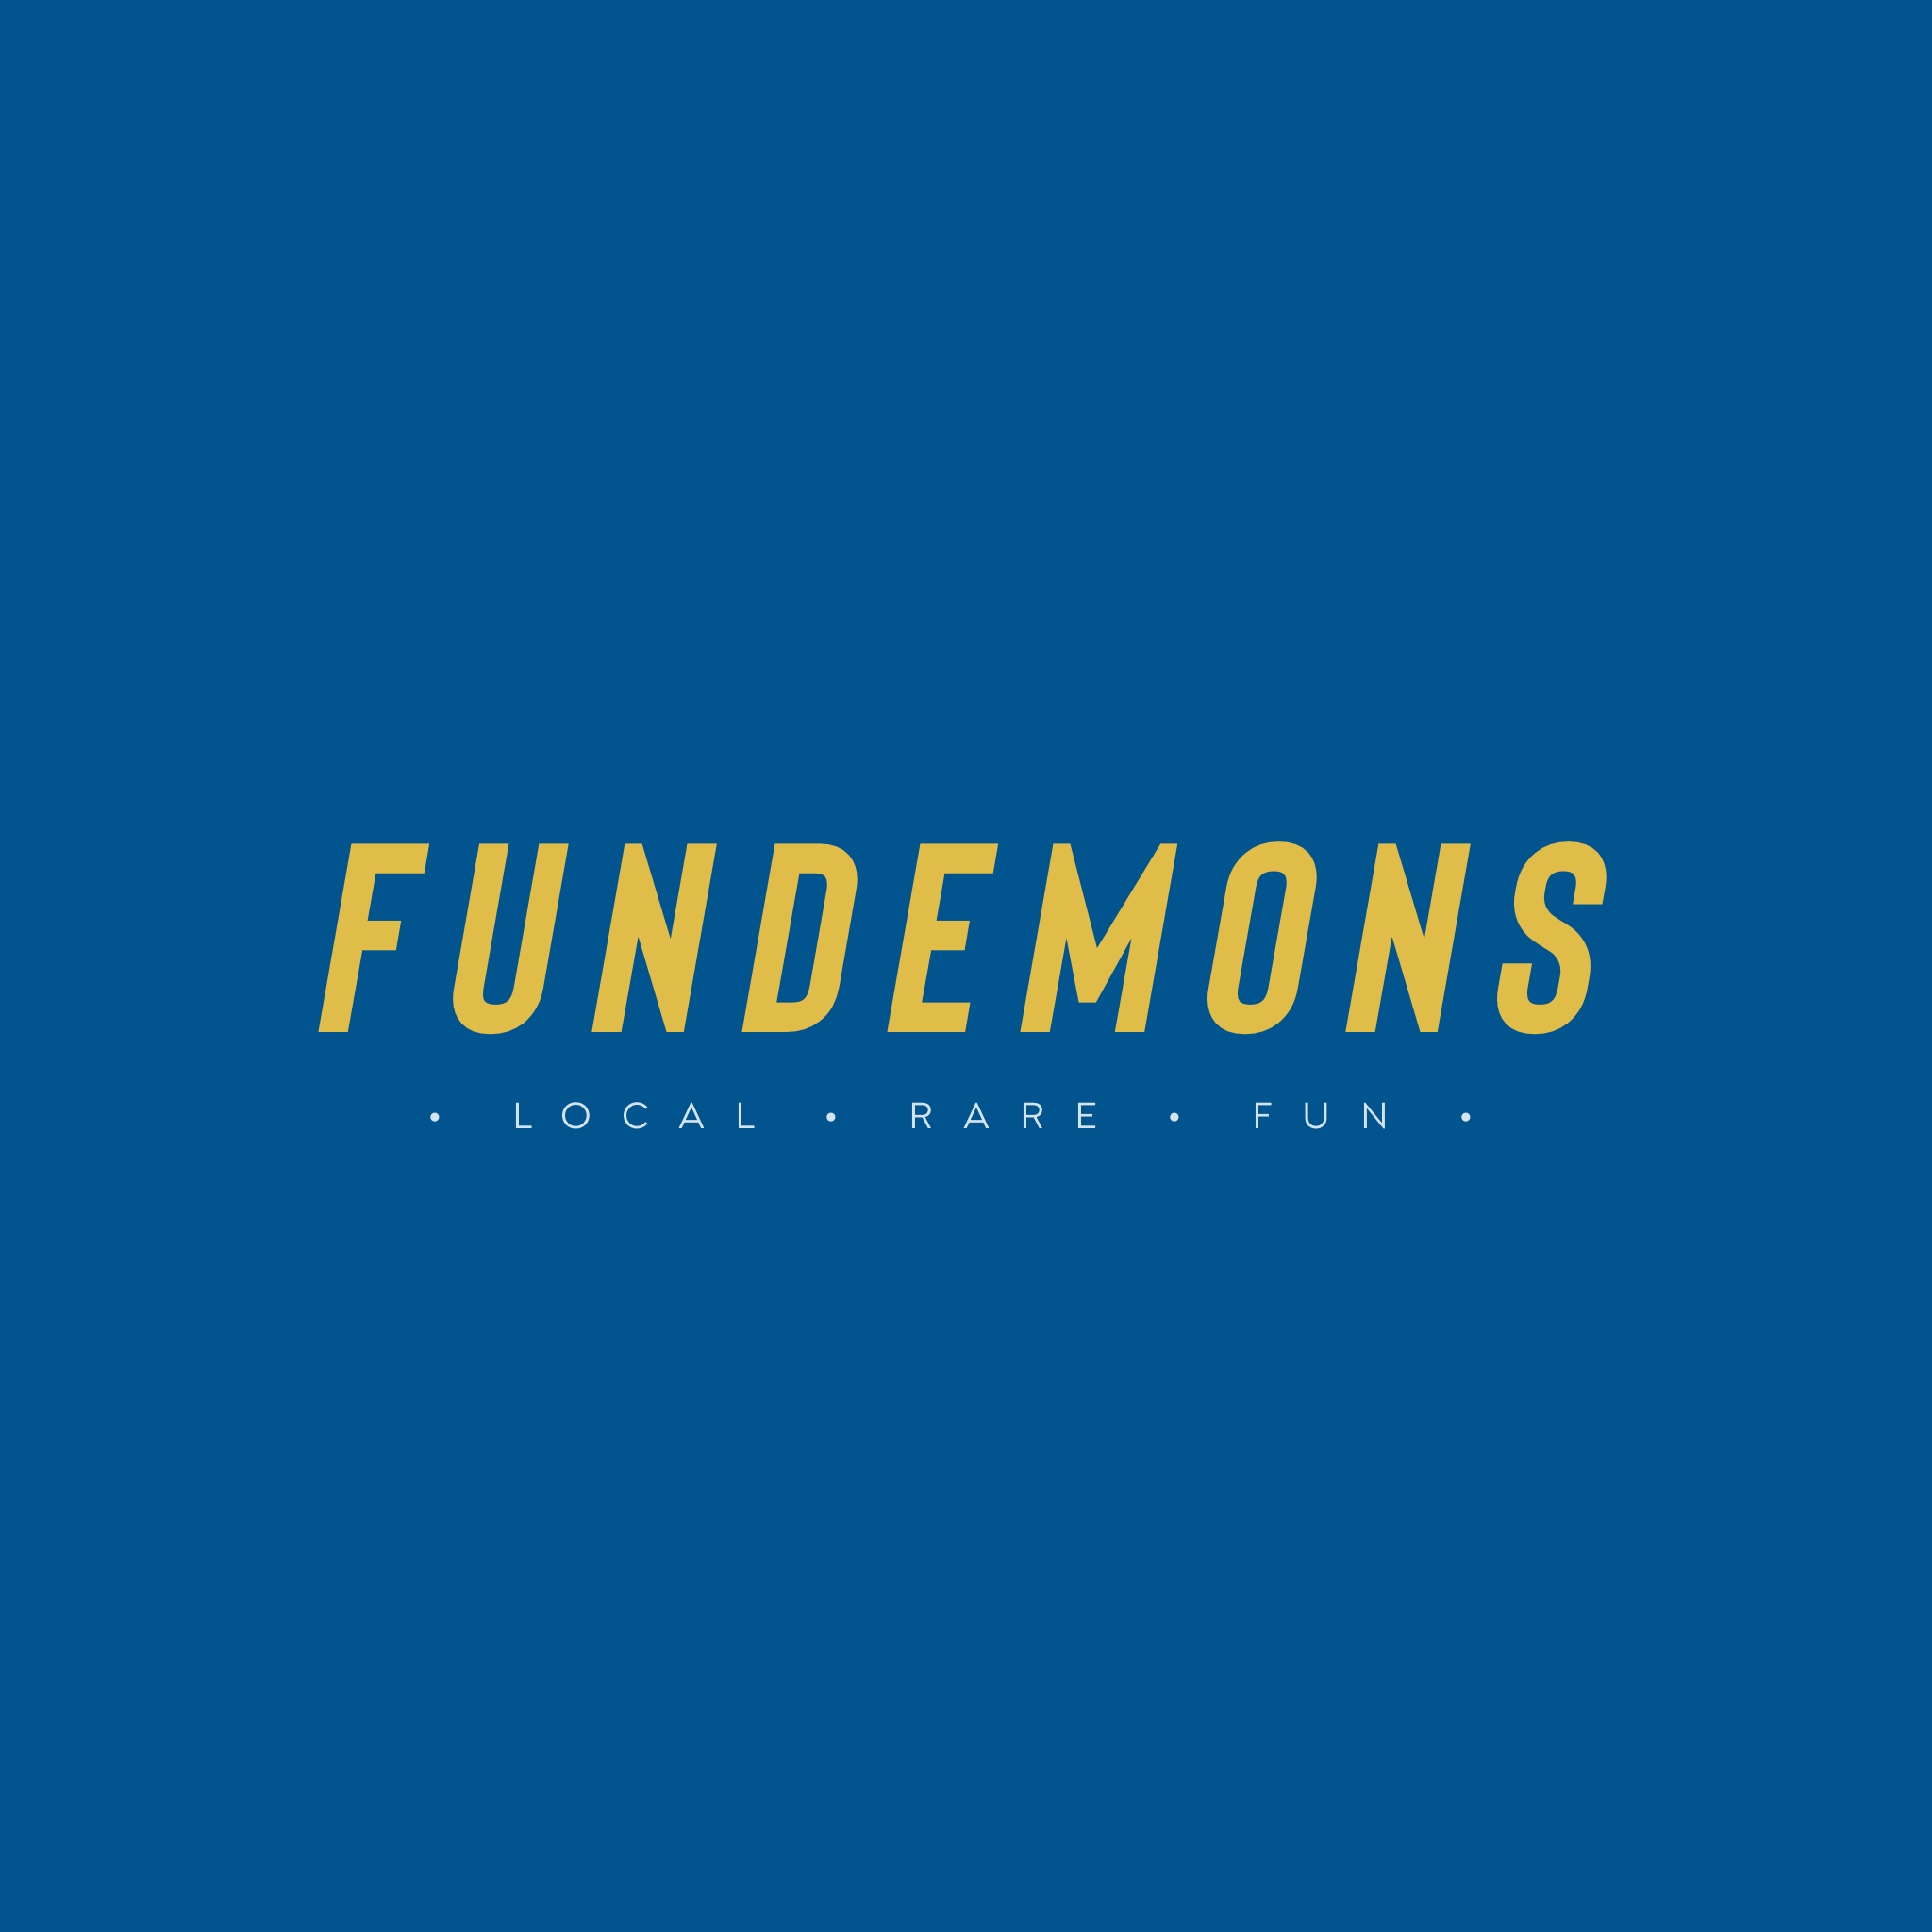 FUNDEMONS – Mr. A